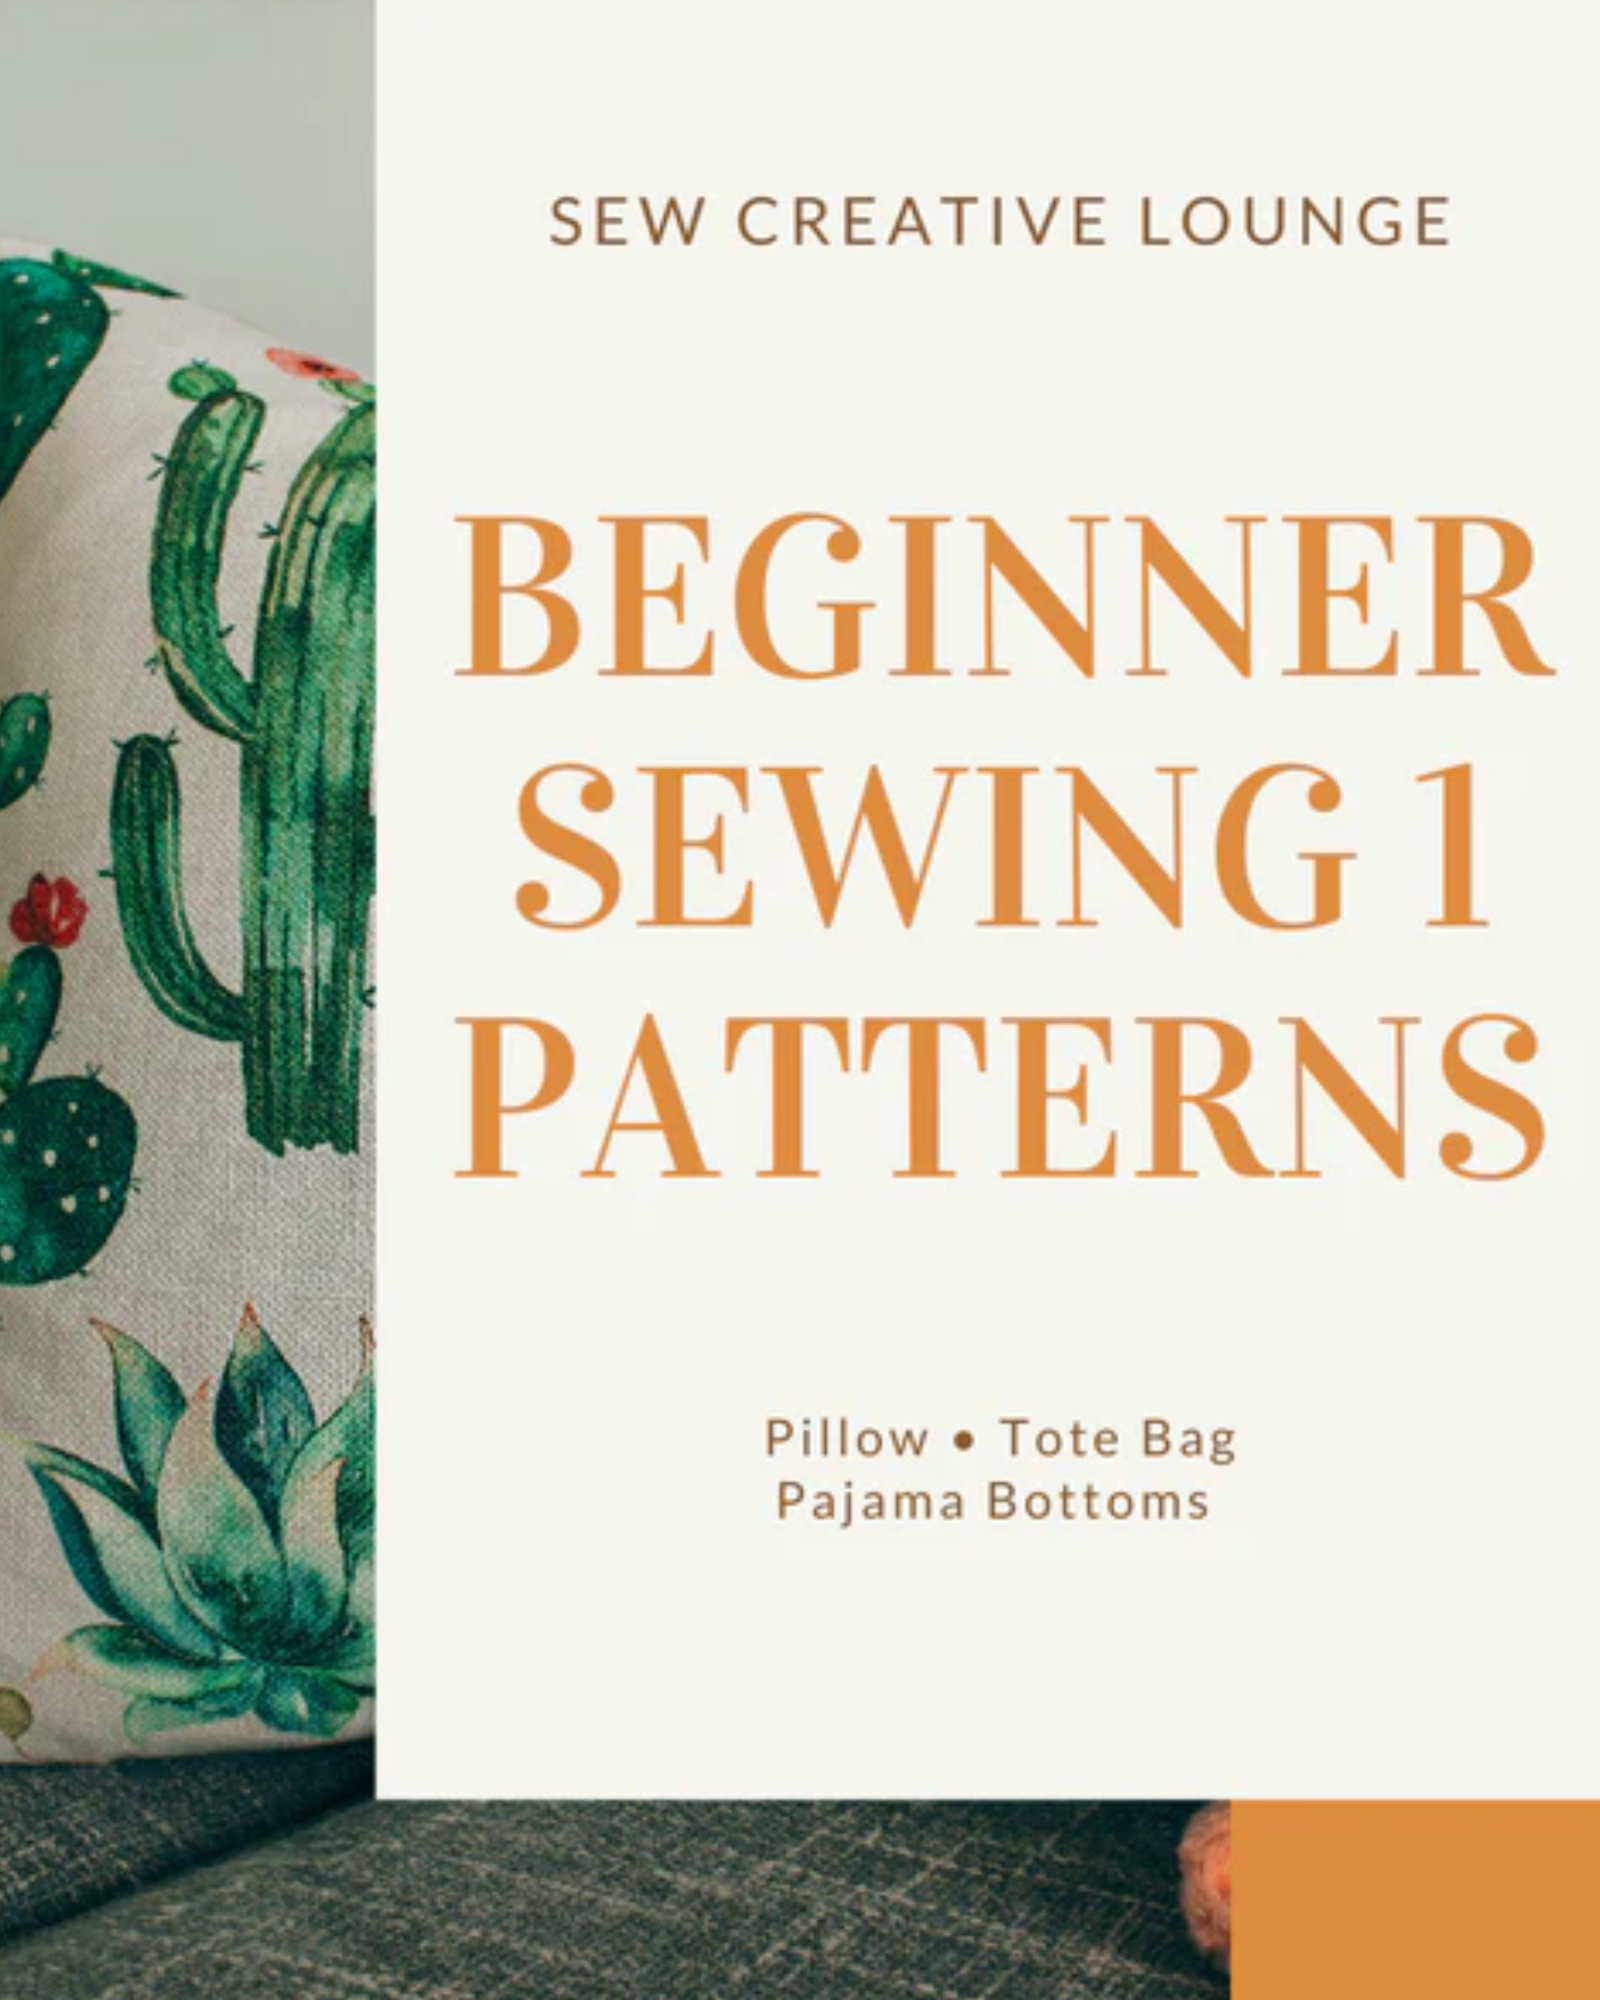 Sew Your Skills: Beginner Sewing 1 Patterns - Your Gateway to Creative Crafting